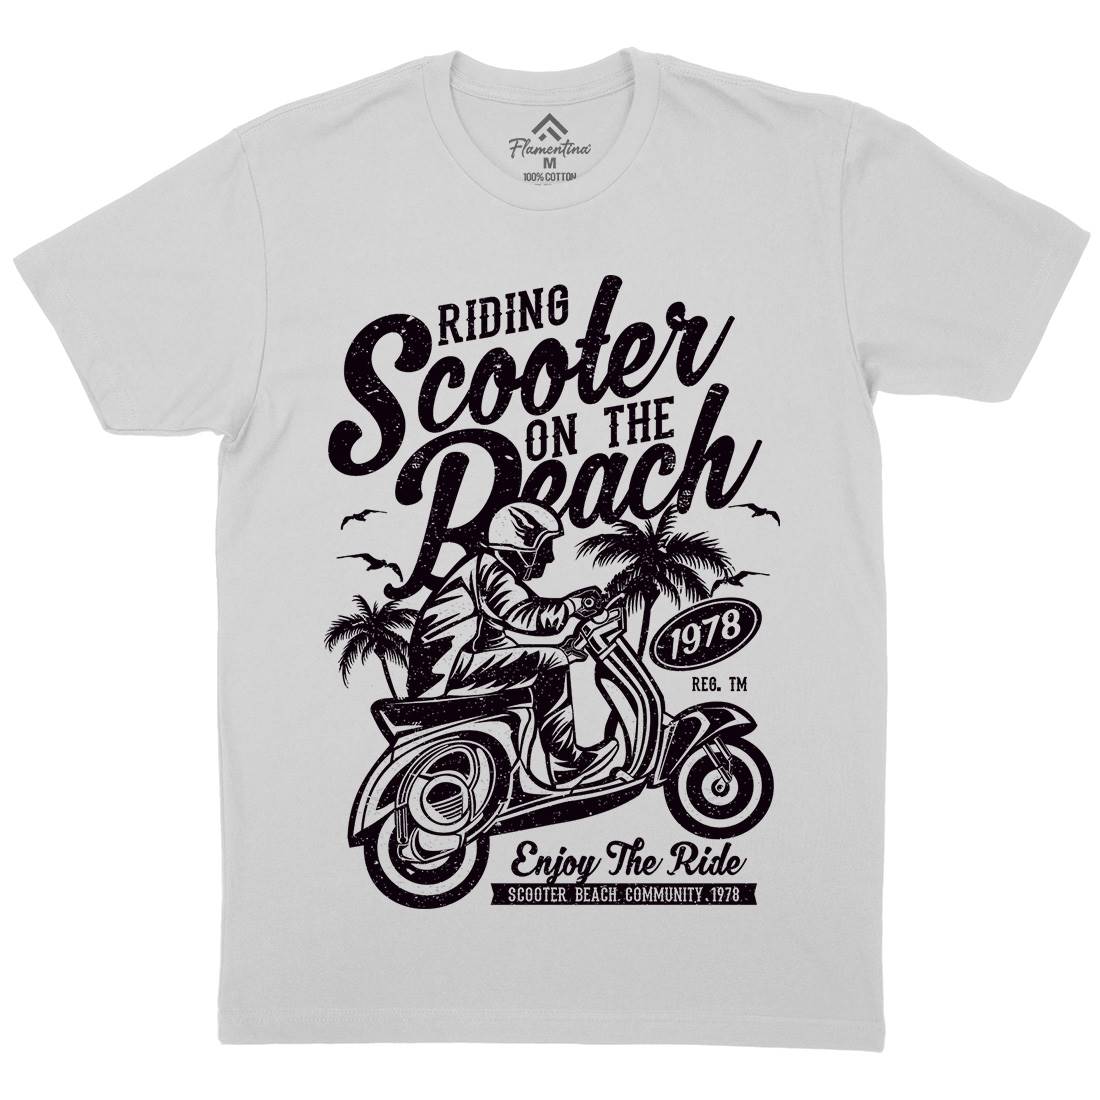 Scooter Beach Mens Crew Neck T-Shirt Motorcycles A134